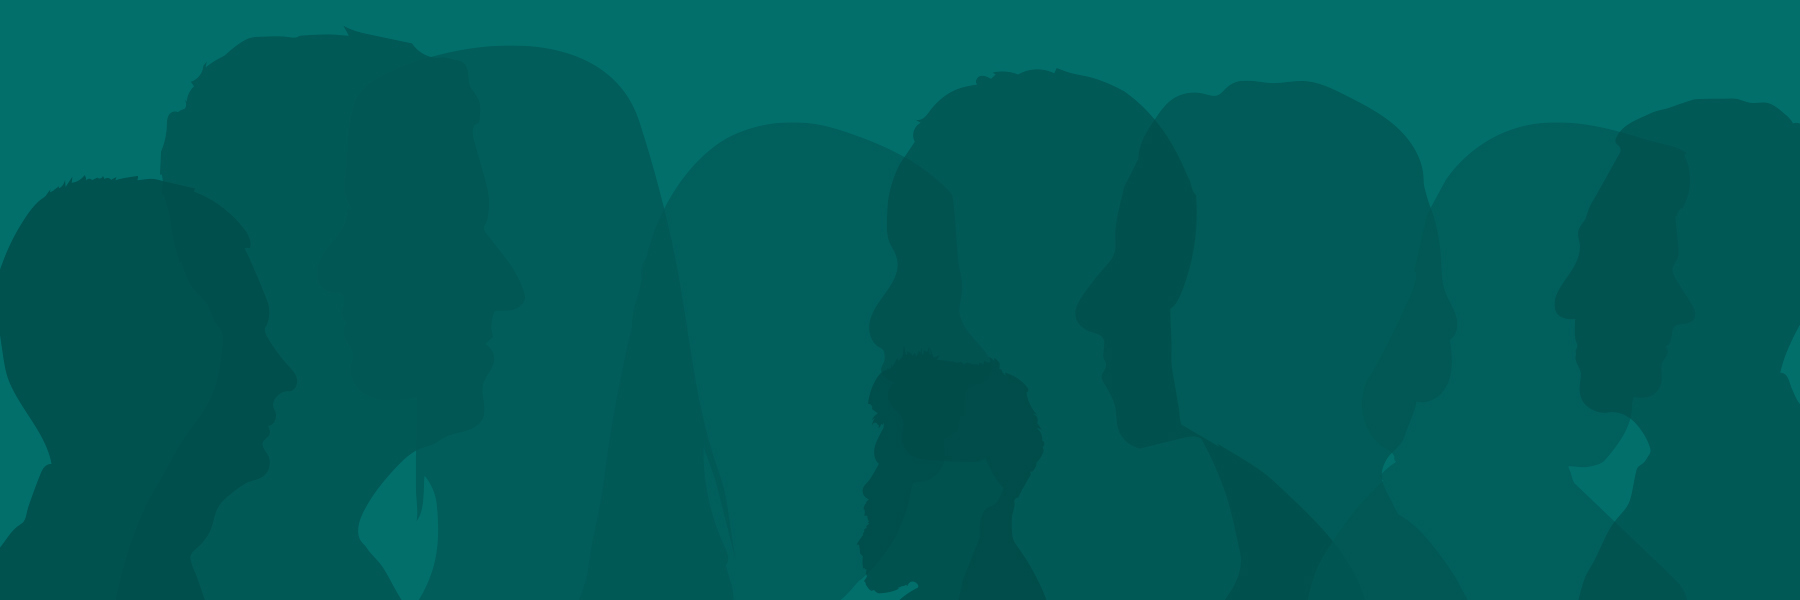 Blog feature image of overlapping human profile silhouettes representing company culture and diversity